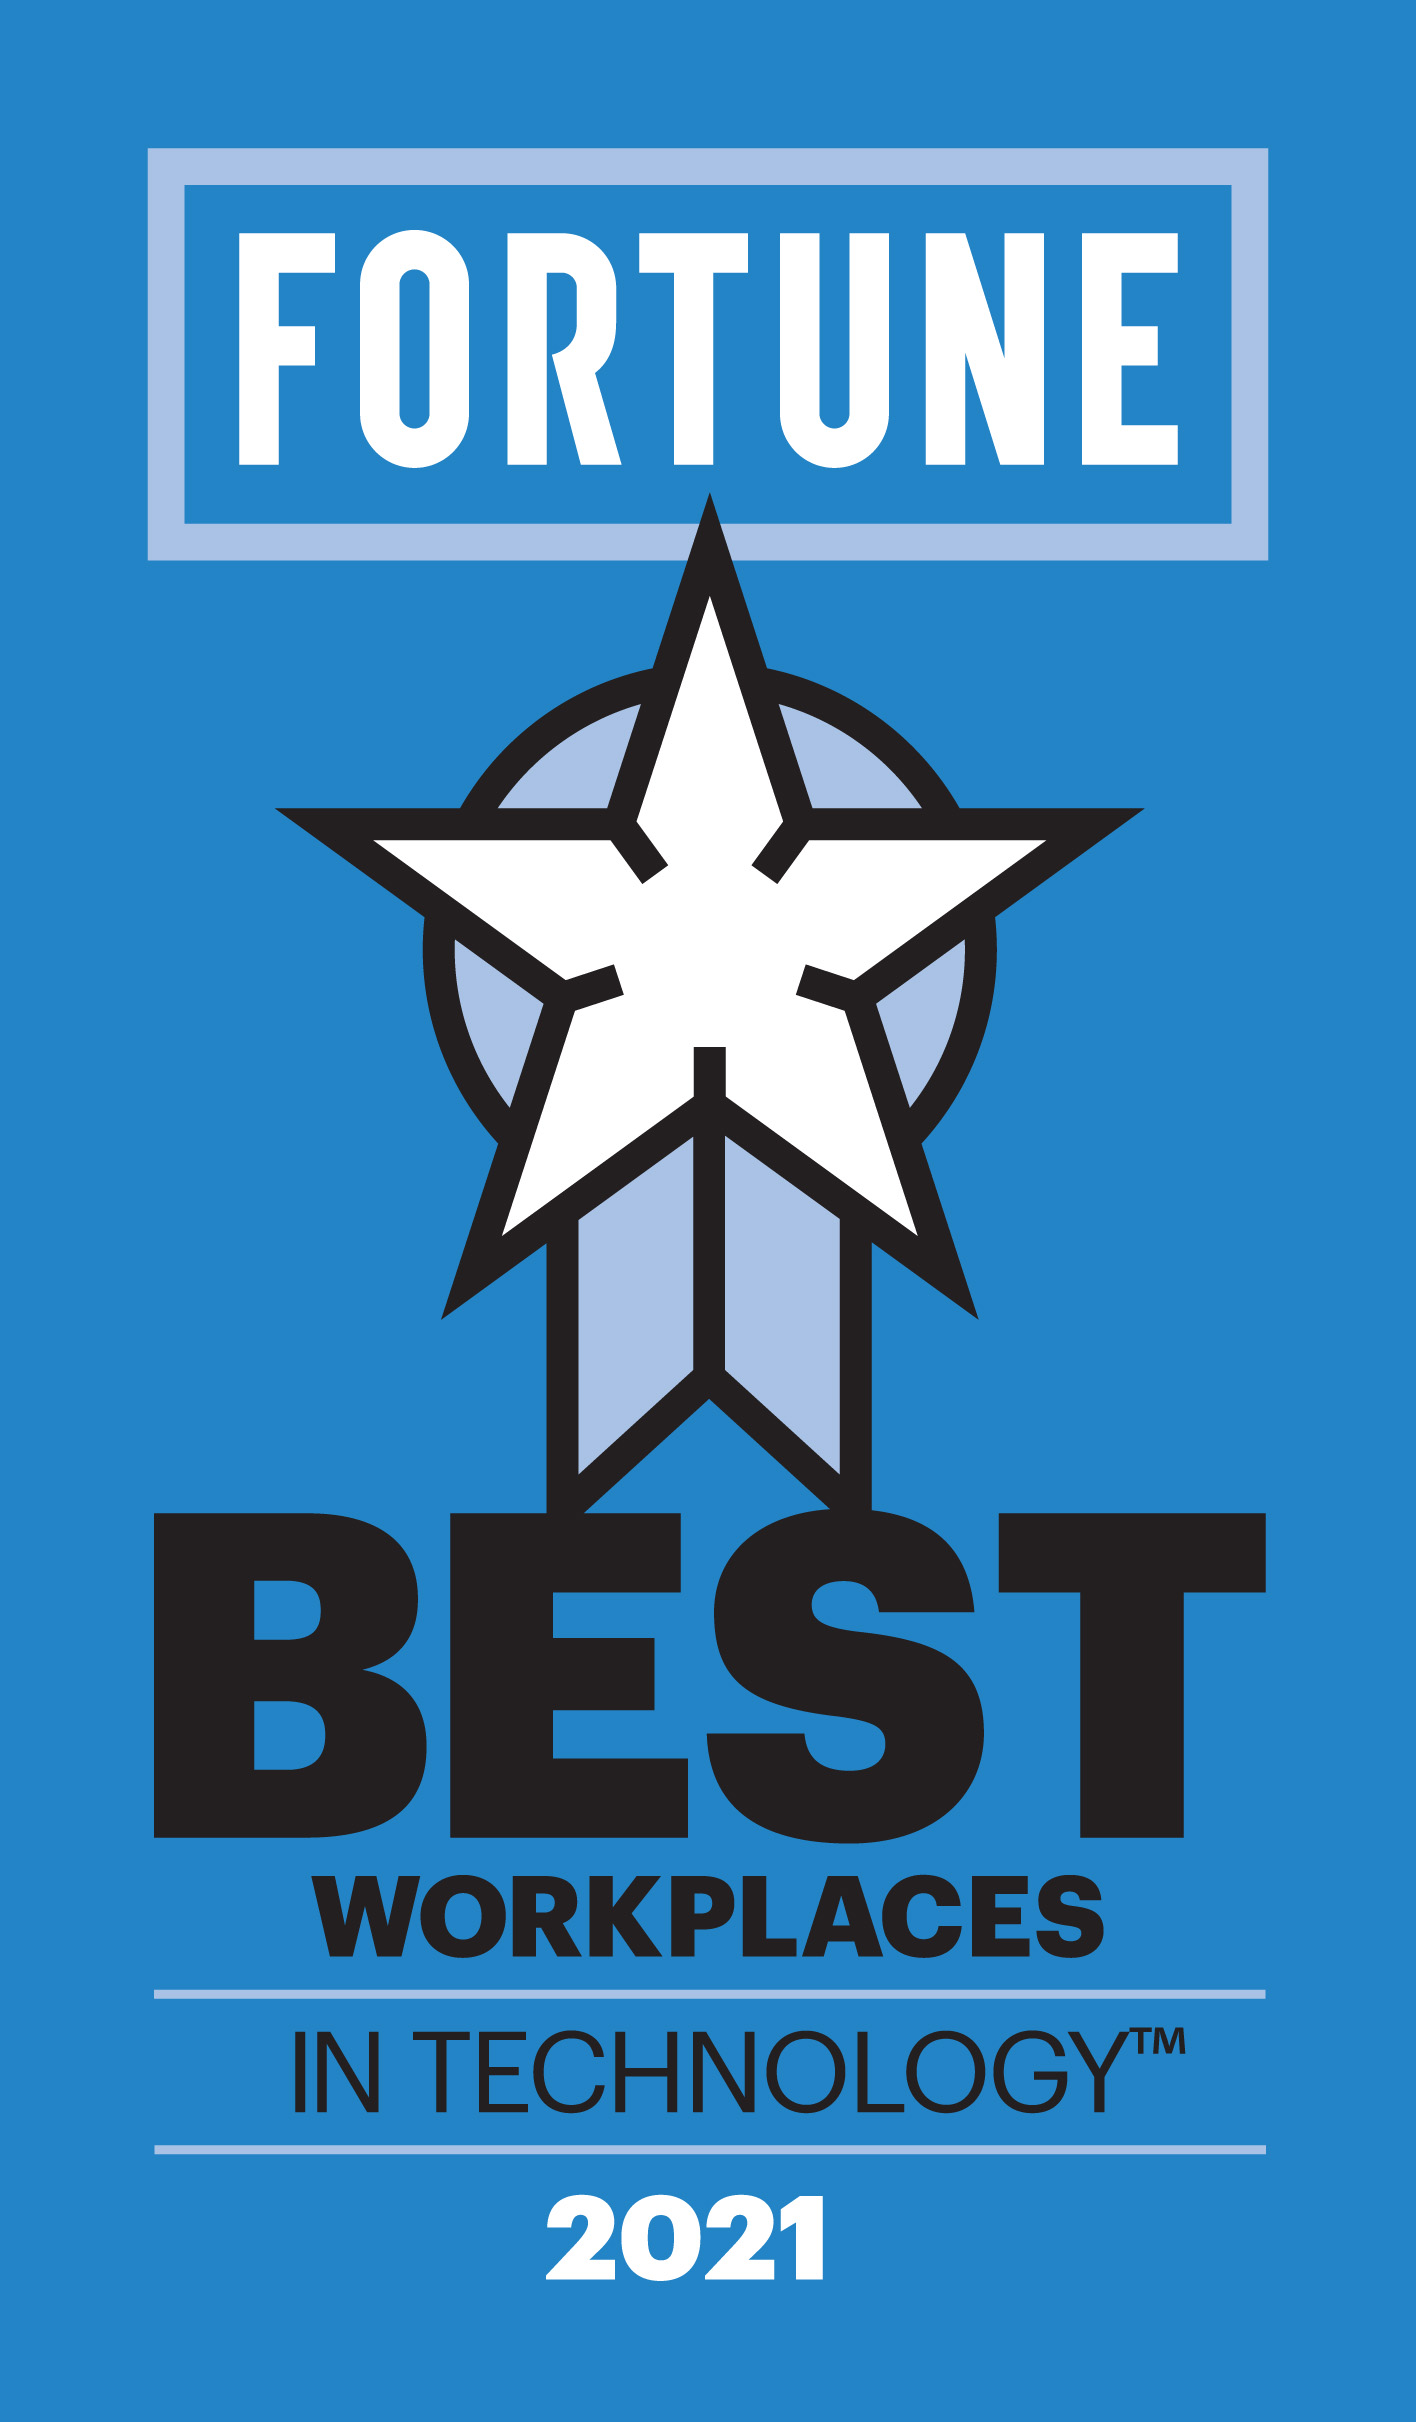 Fortune Best Workplaces in Technology